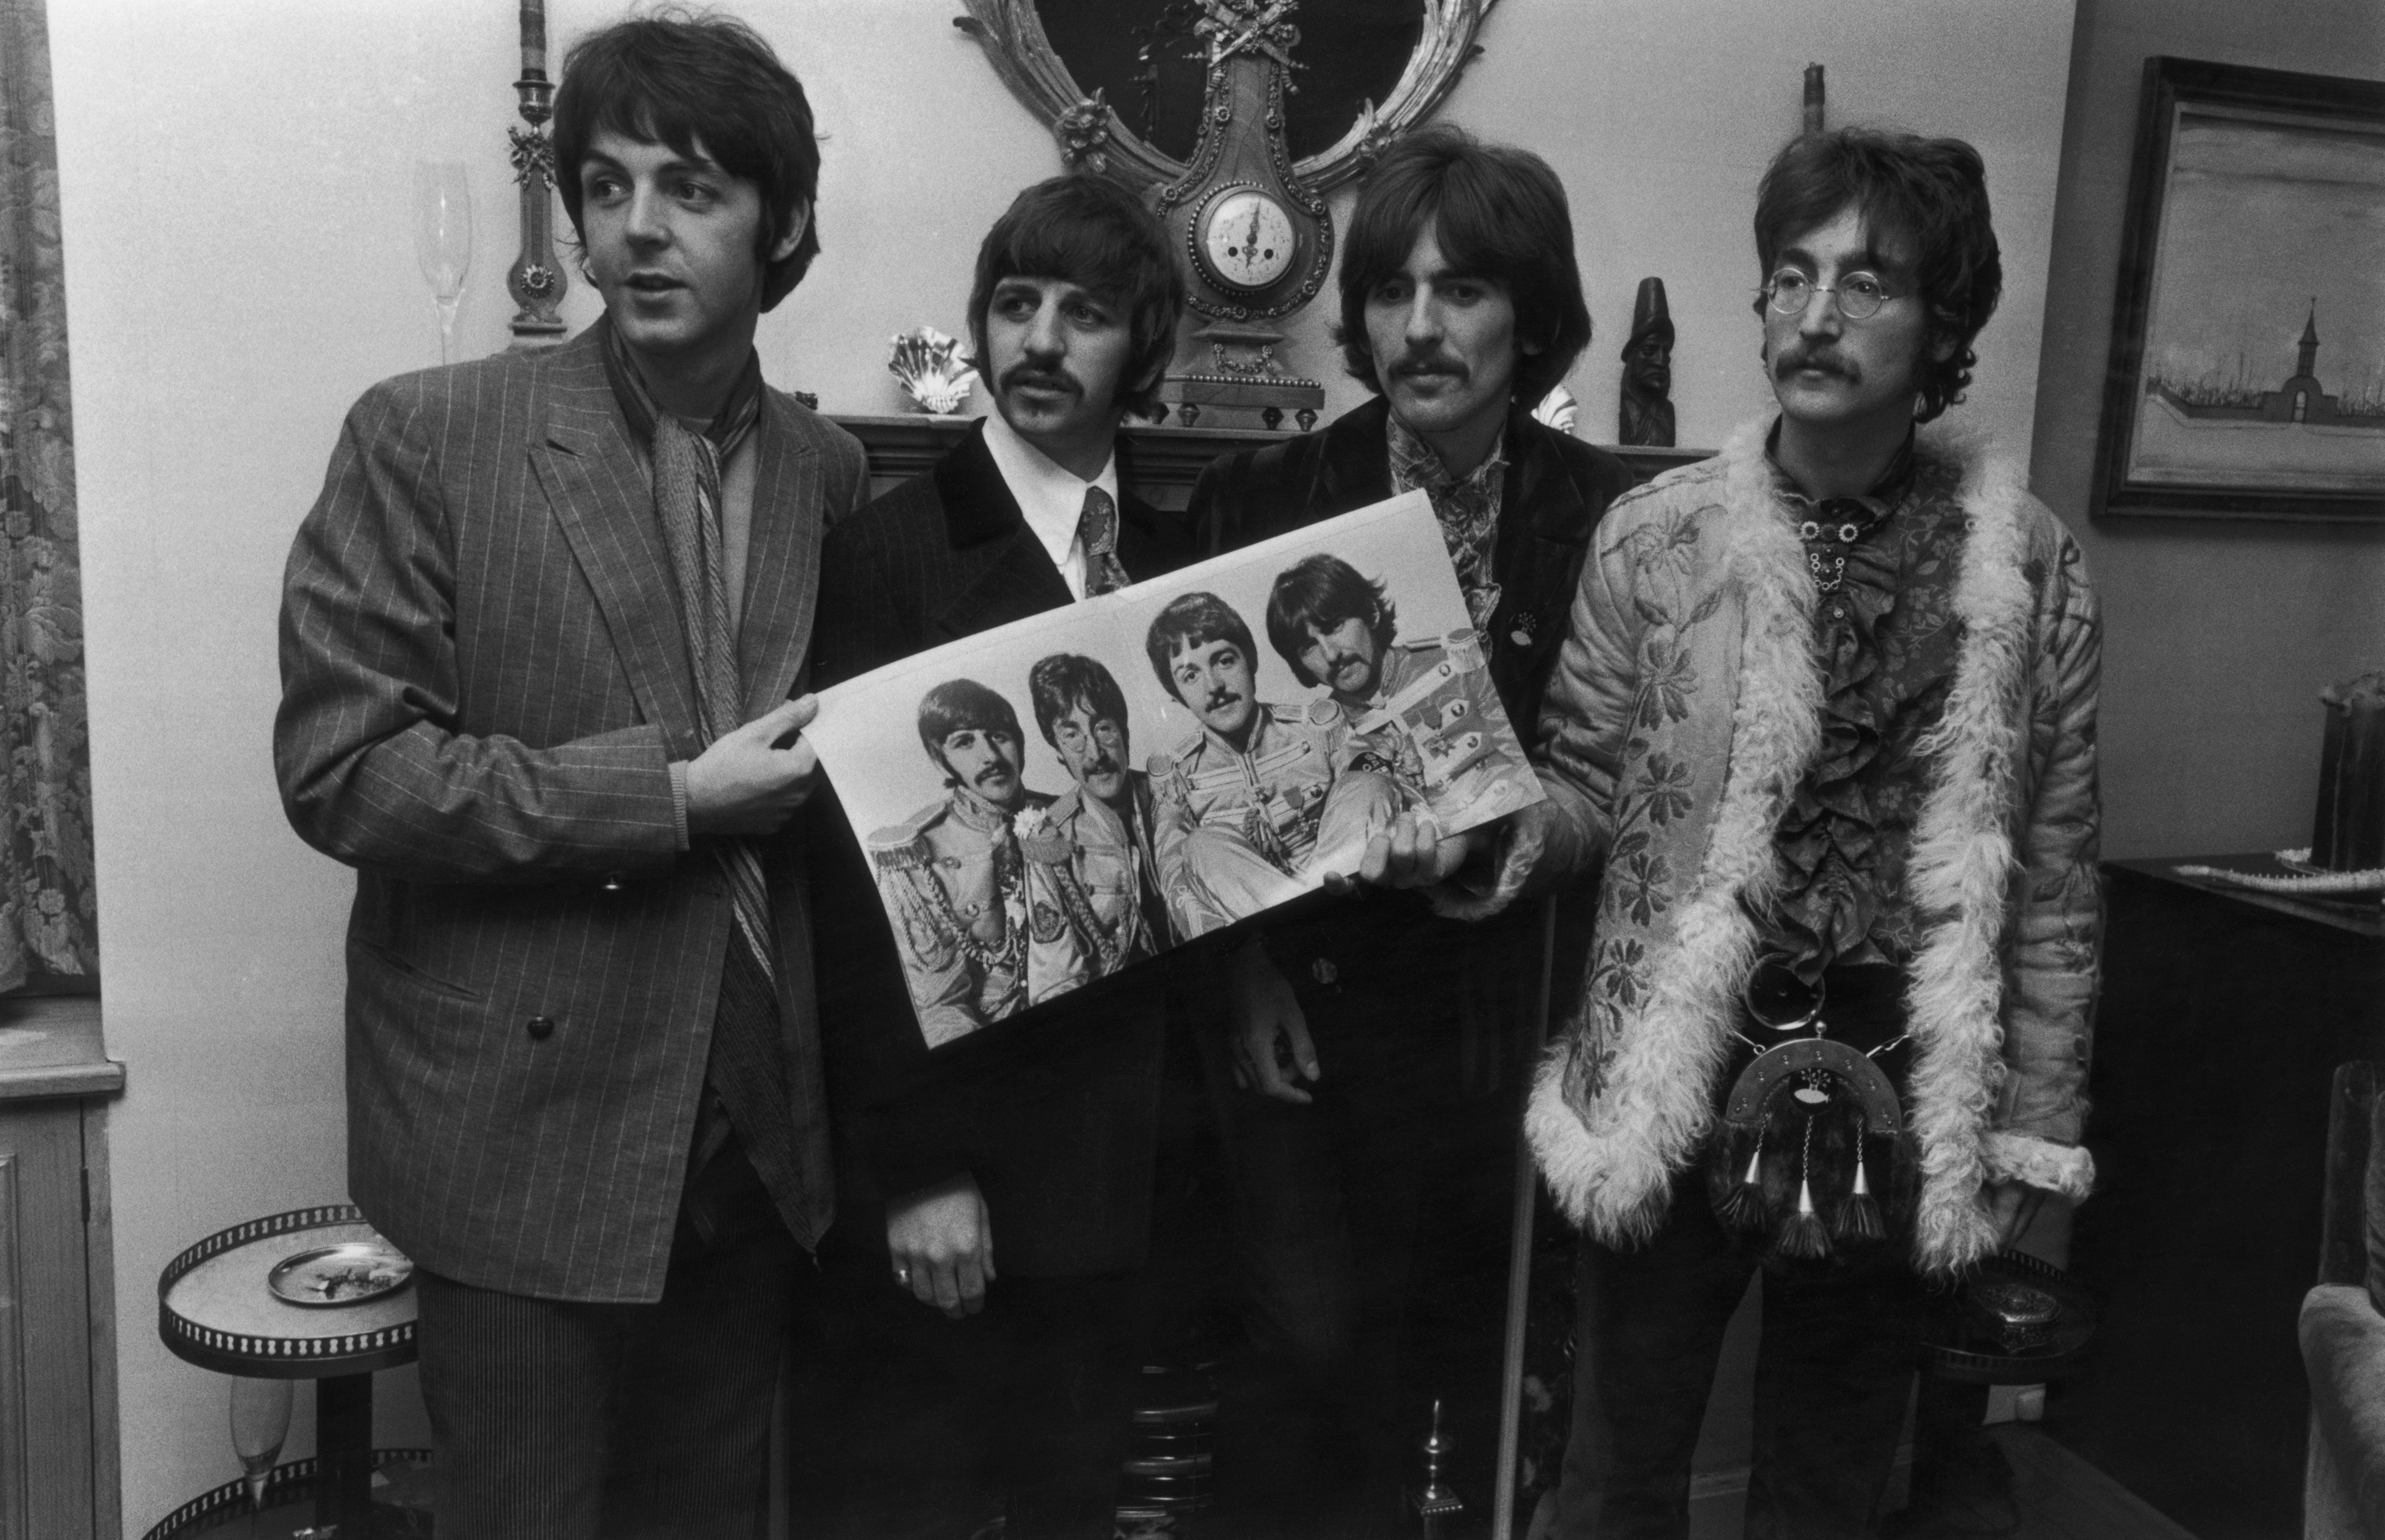 The Beatles hold a photo of themselves.